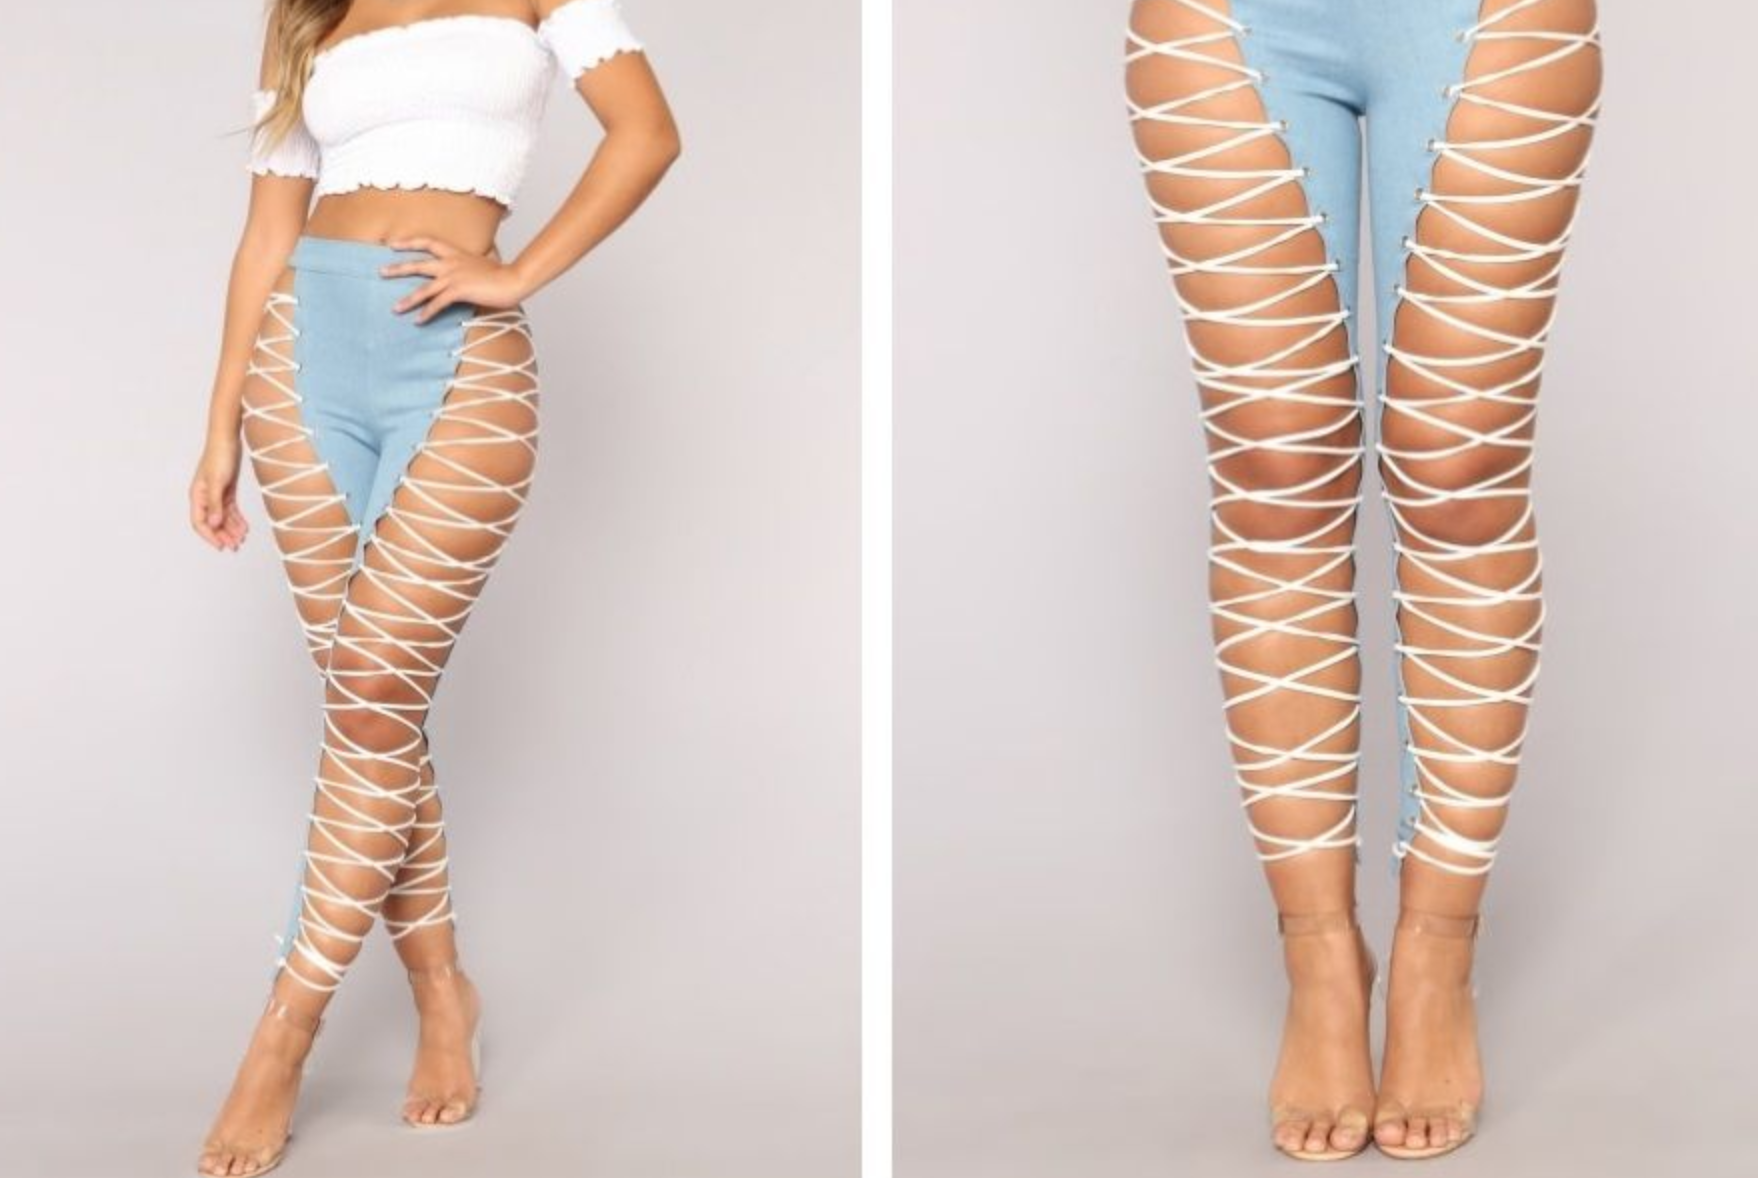 Butt-ripped jeans are apparently a thing now, because of course